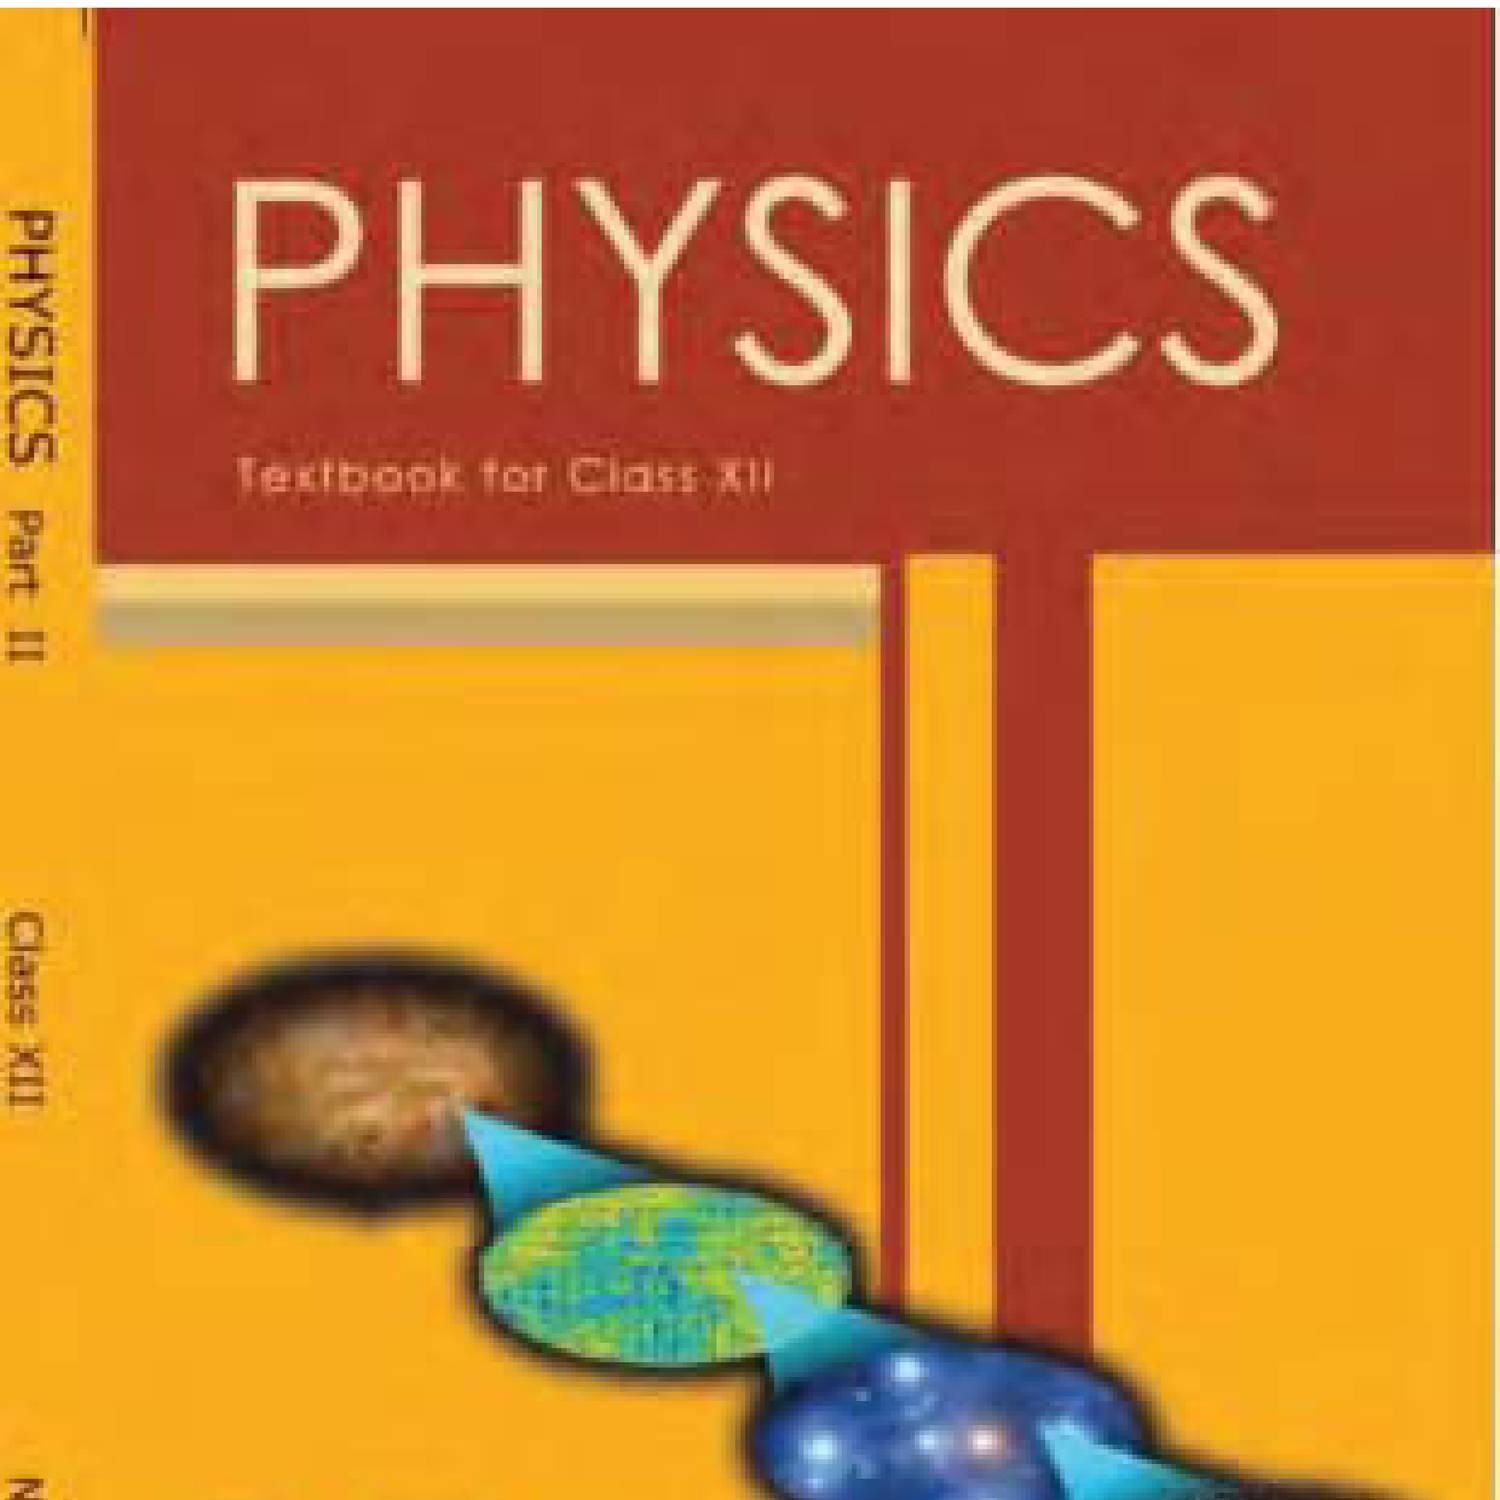 physical education class 12 ncert book pdf